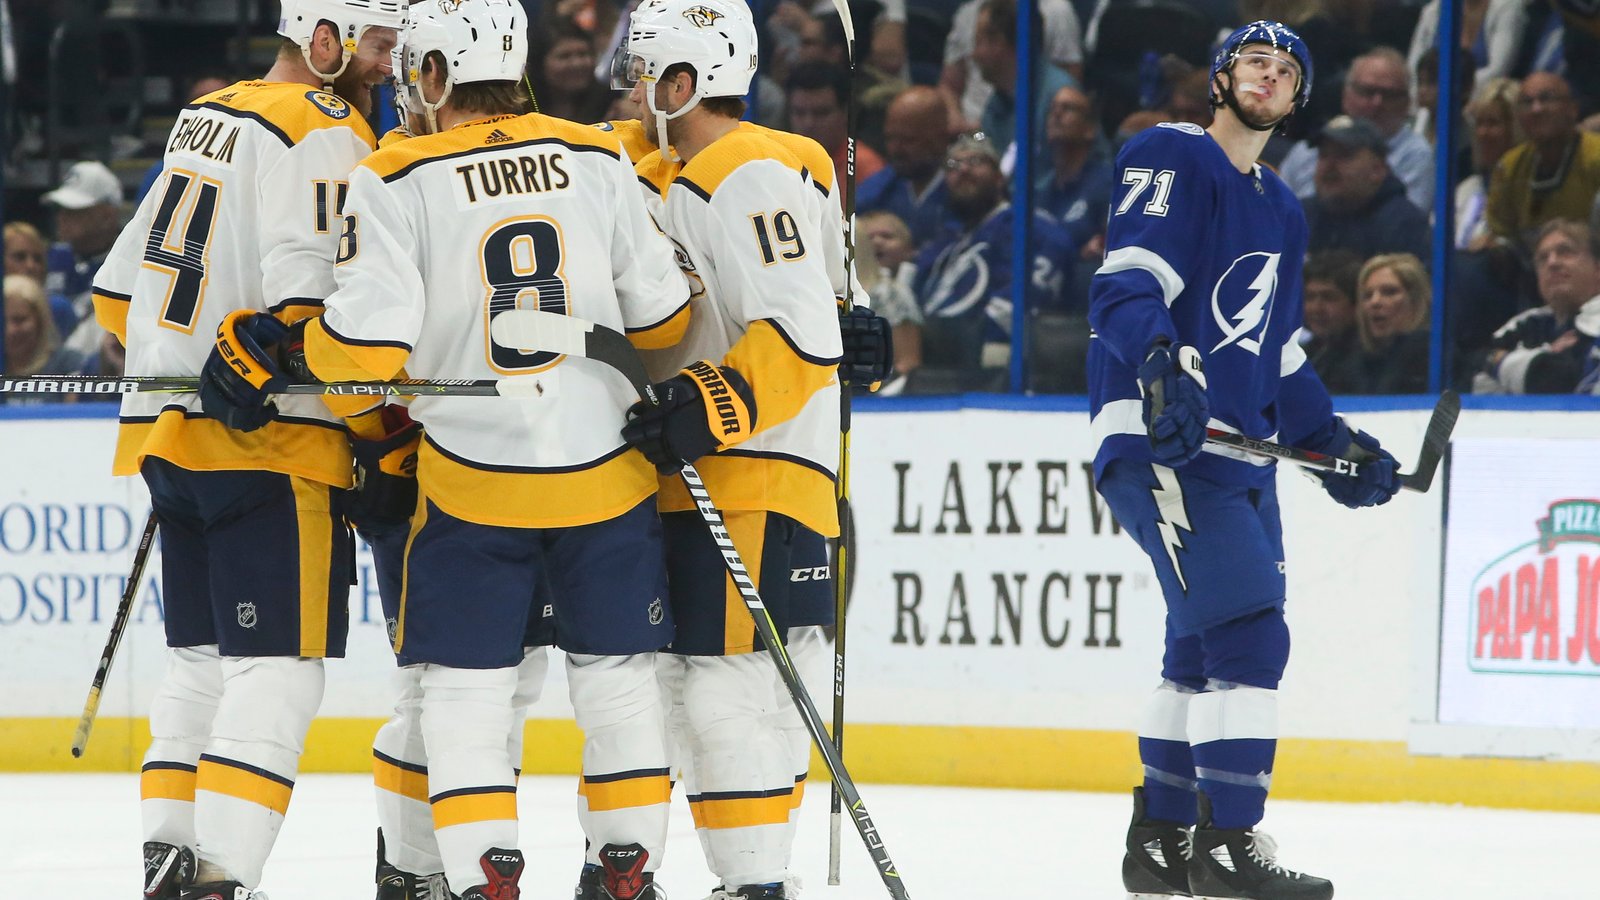 Predators place core forward on injured reserve, forced to make another call up.